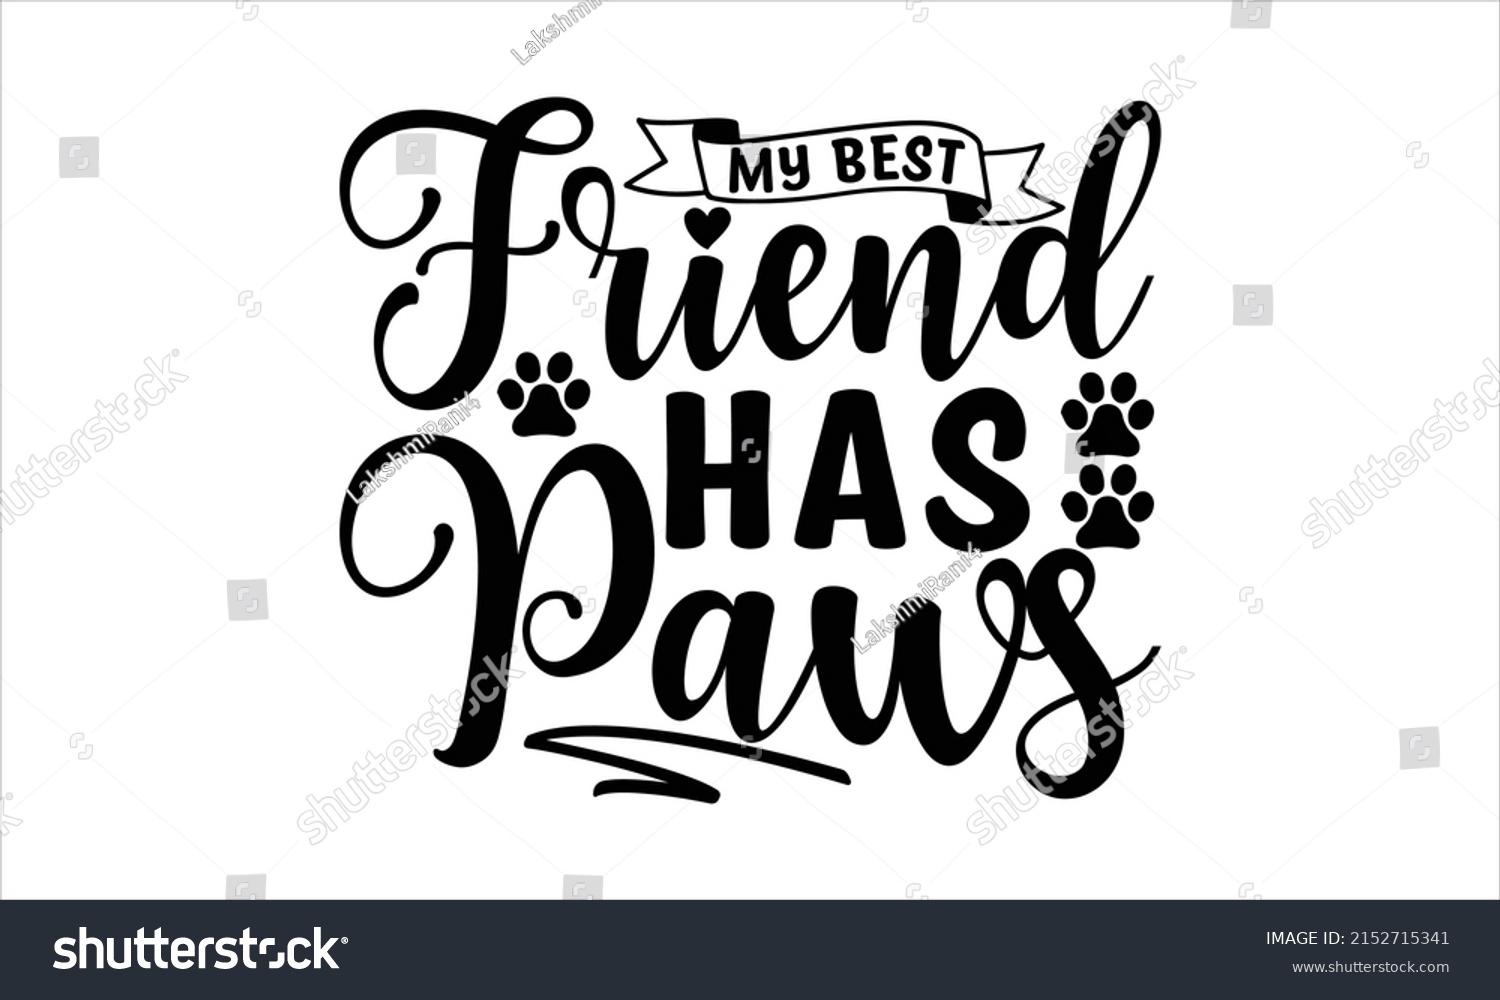 SVG of  My best friend has paws  -   Lettering design for greeting banners, Mouse Pads, Prints, Cards and Posters, Mugs, Notebooks, Floor Pillows and T-shirt prints design. svg